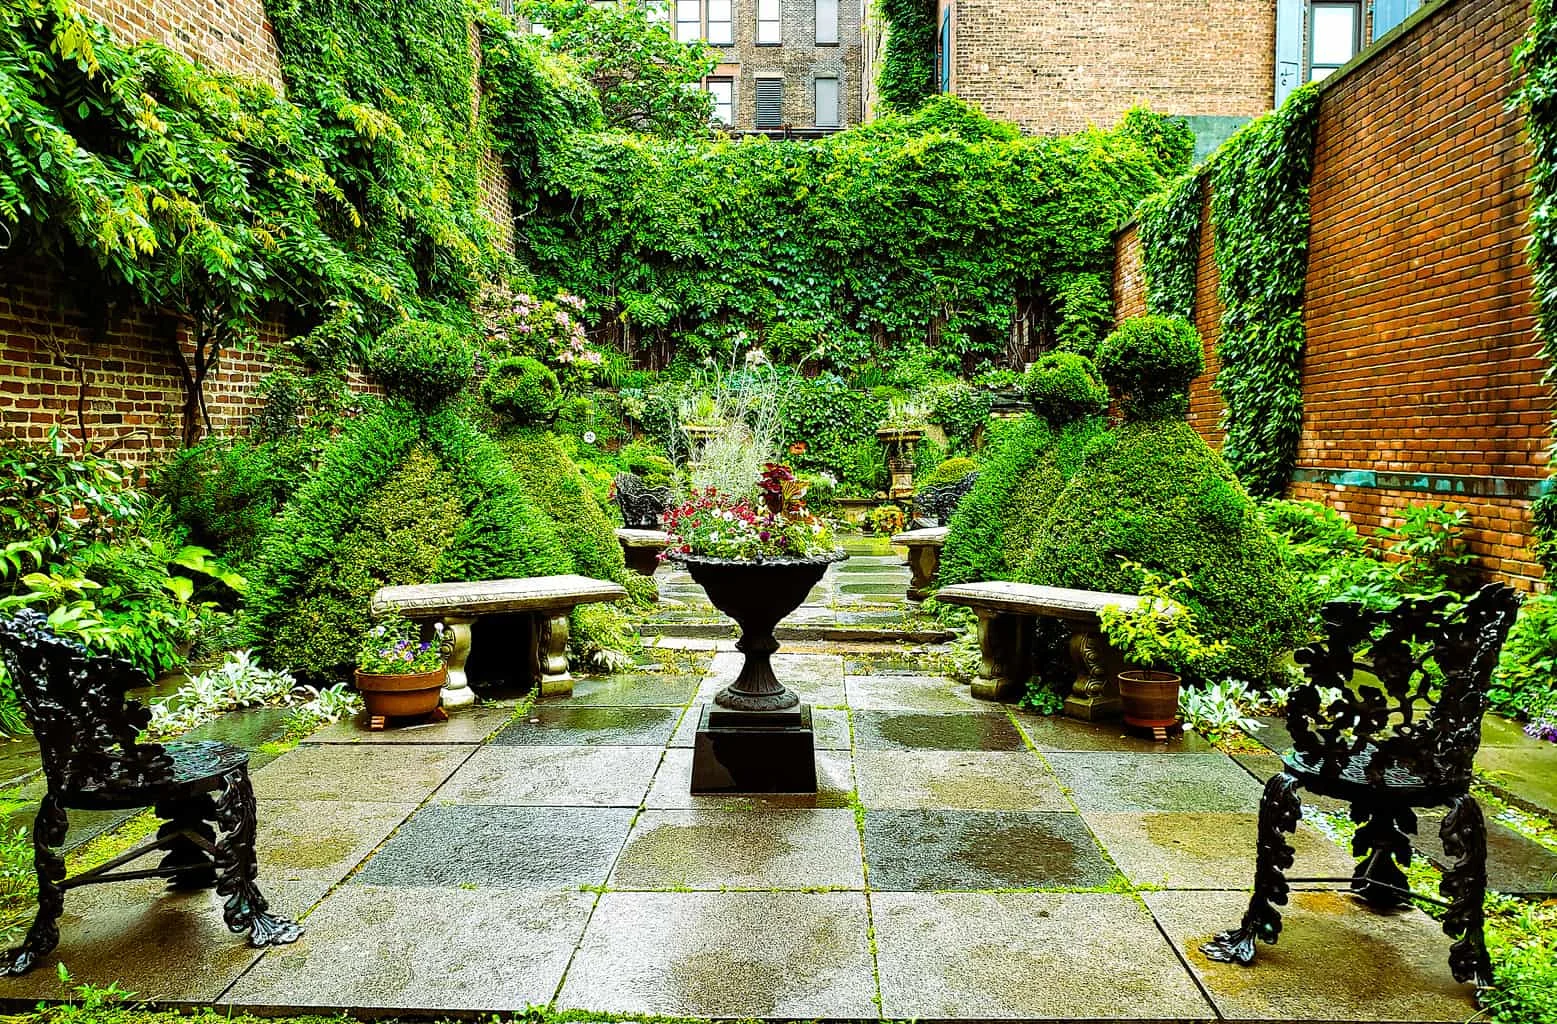 The vibrant green garden behind the Merchant's House Museum is just one of the many unusual things to see in NYC.